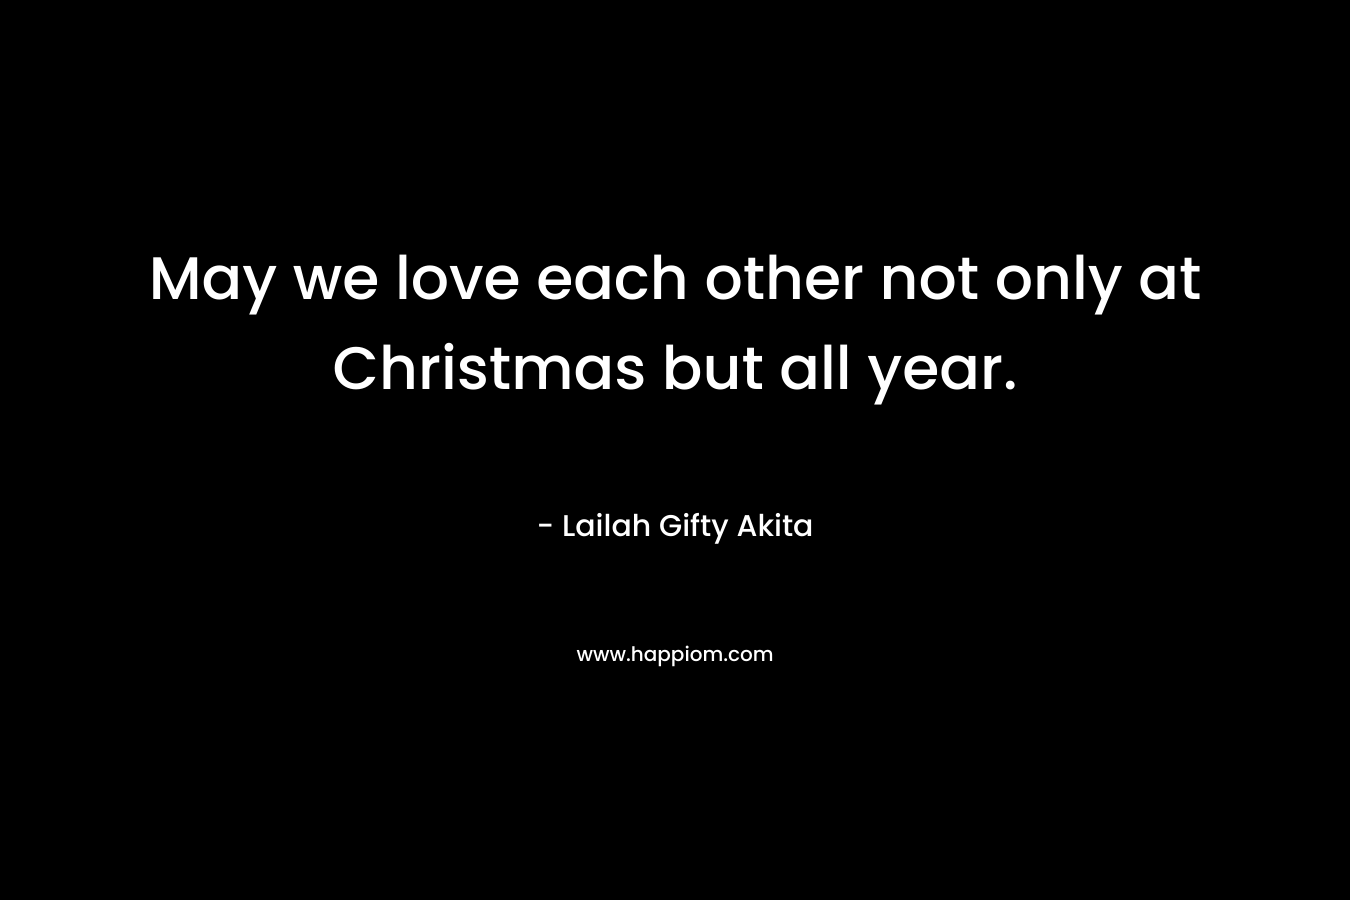 May we love each other not only at Christmas but all year.